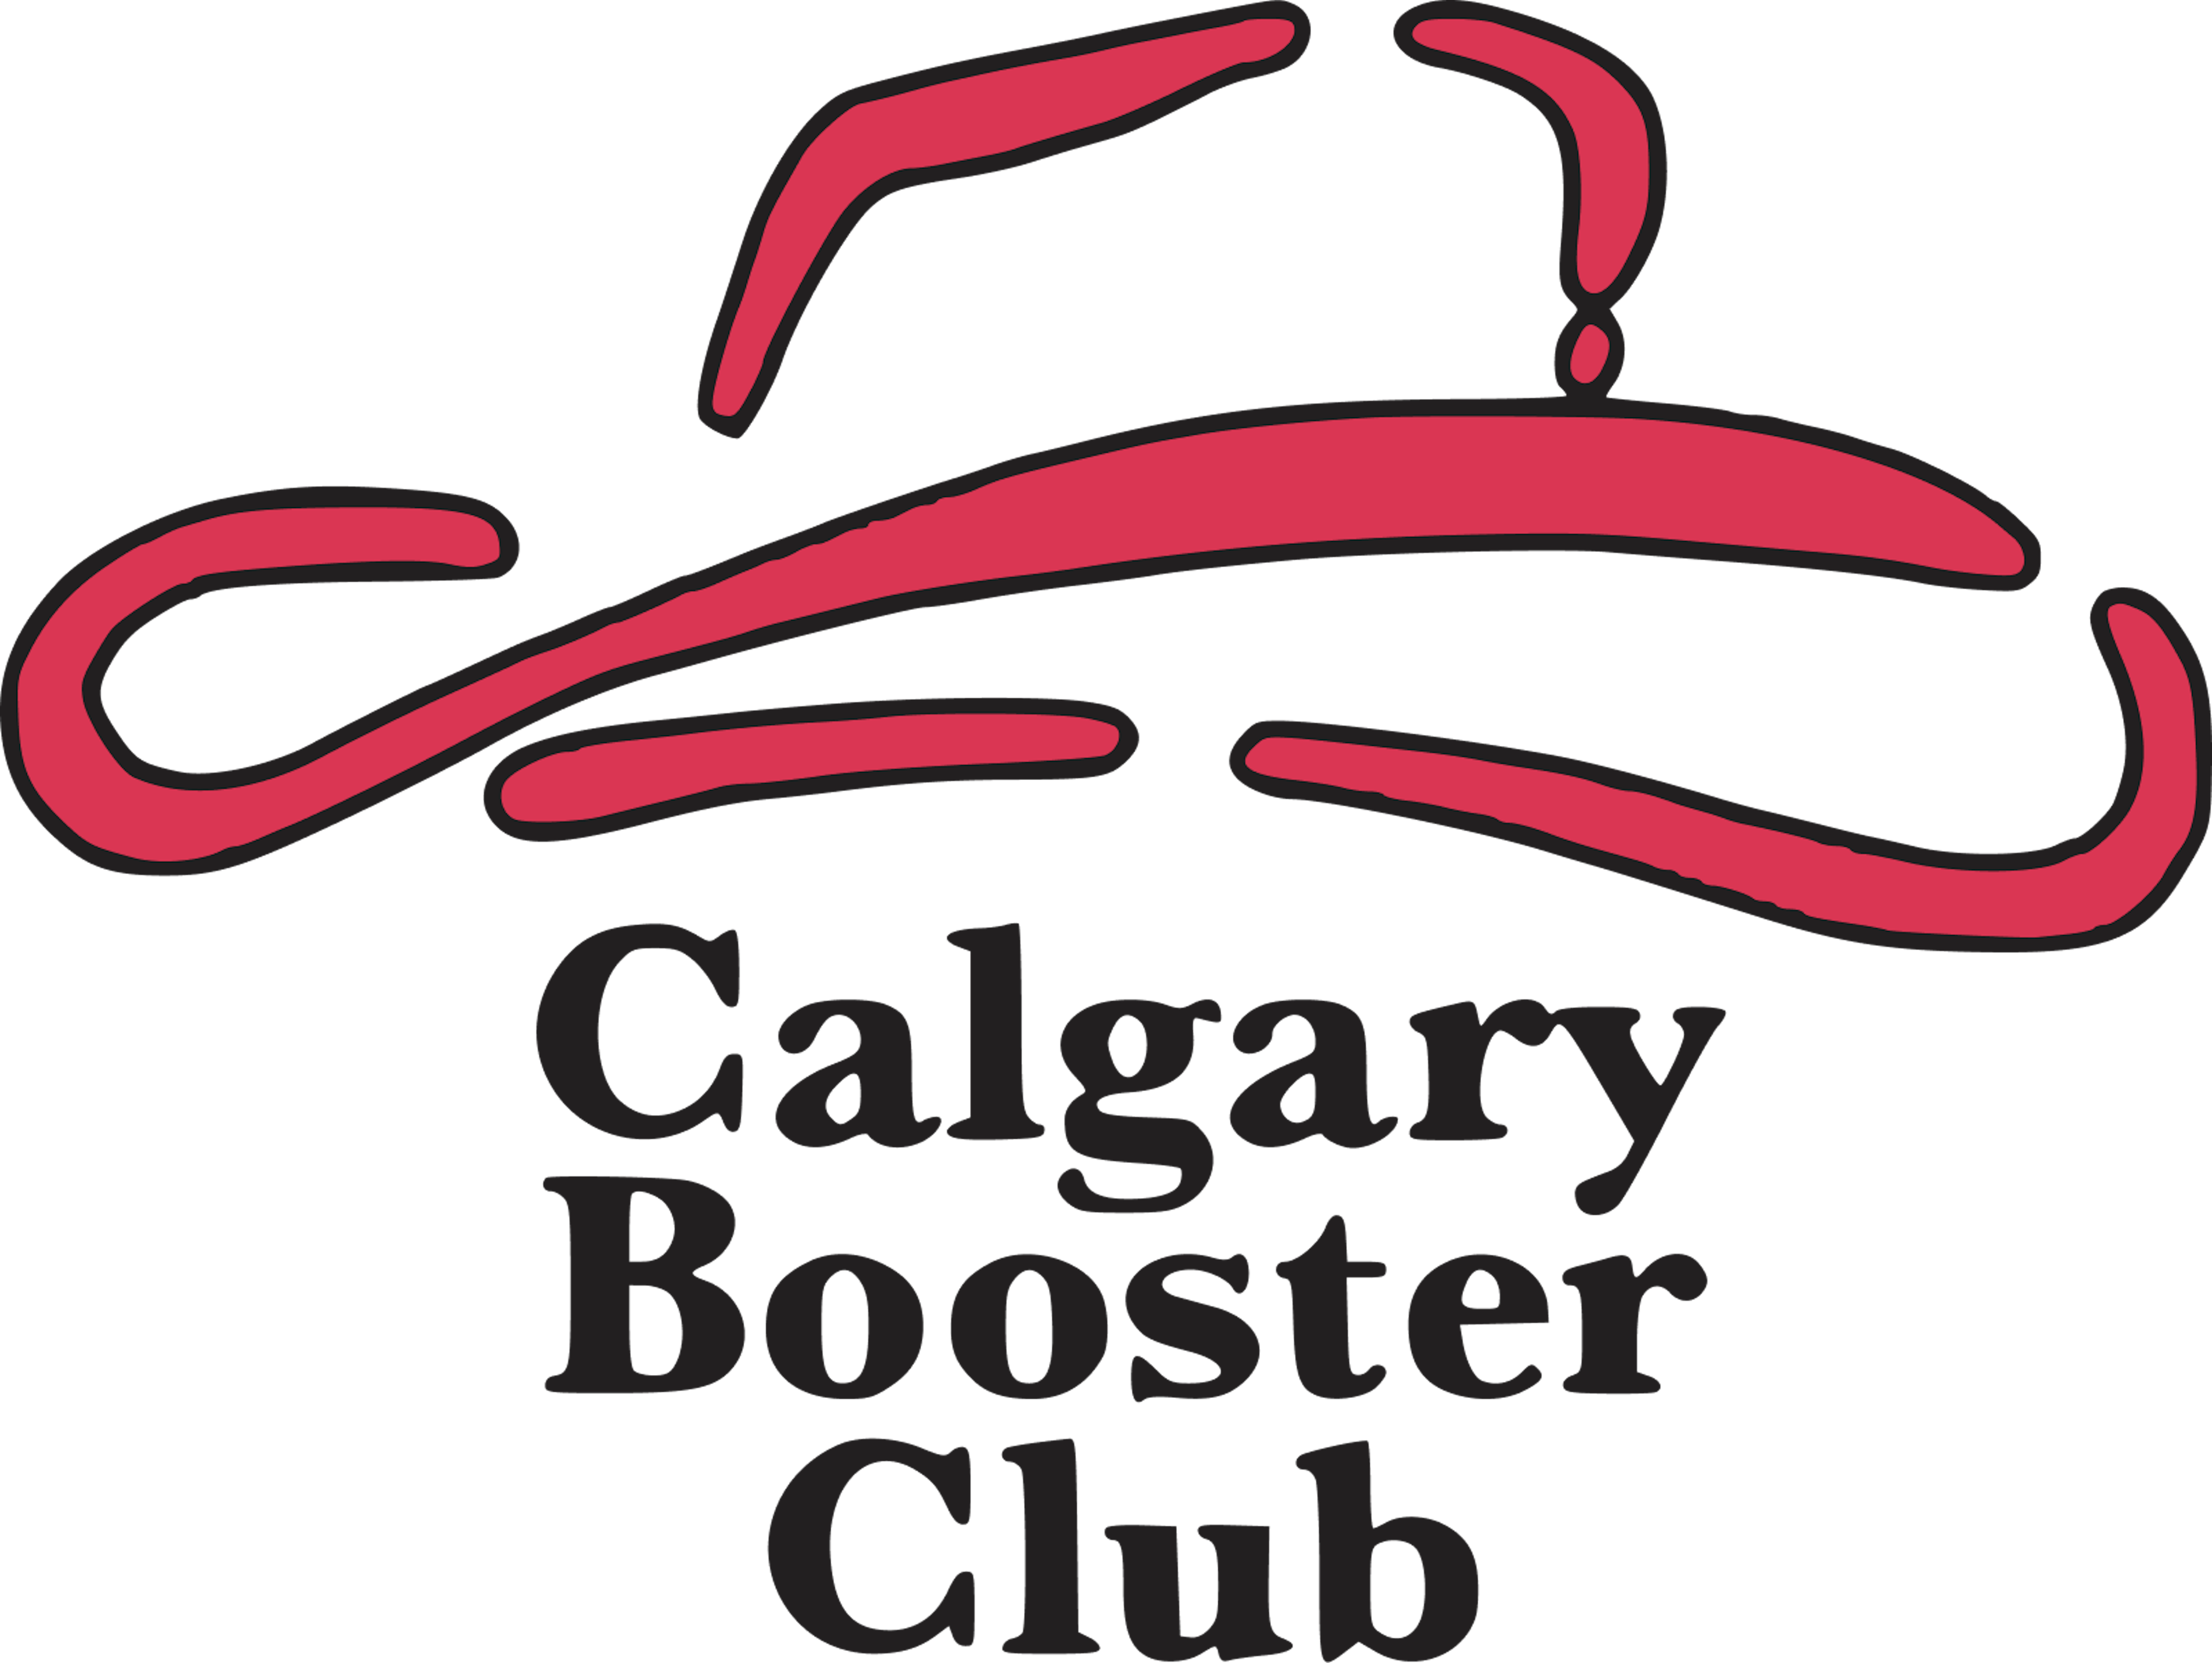 Calgary Booster Club logo on transparent background